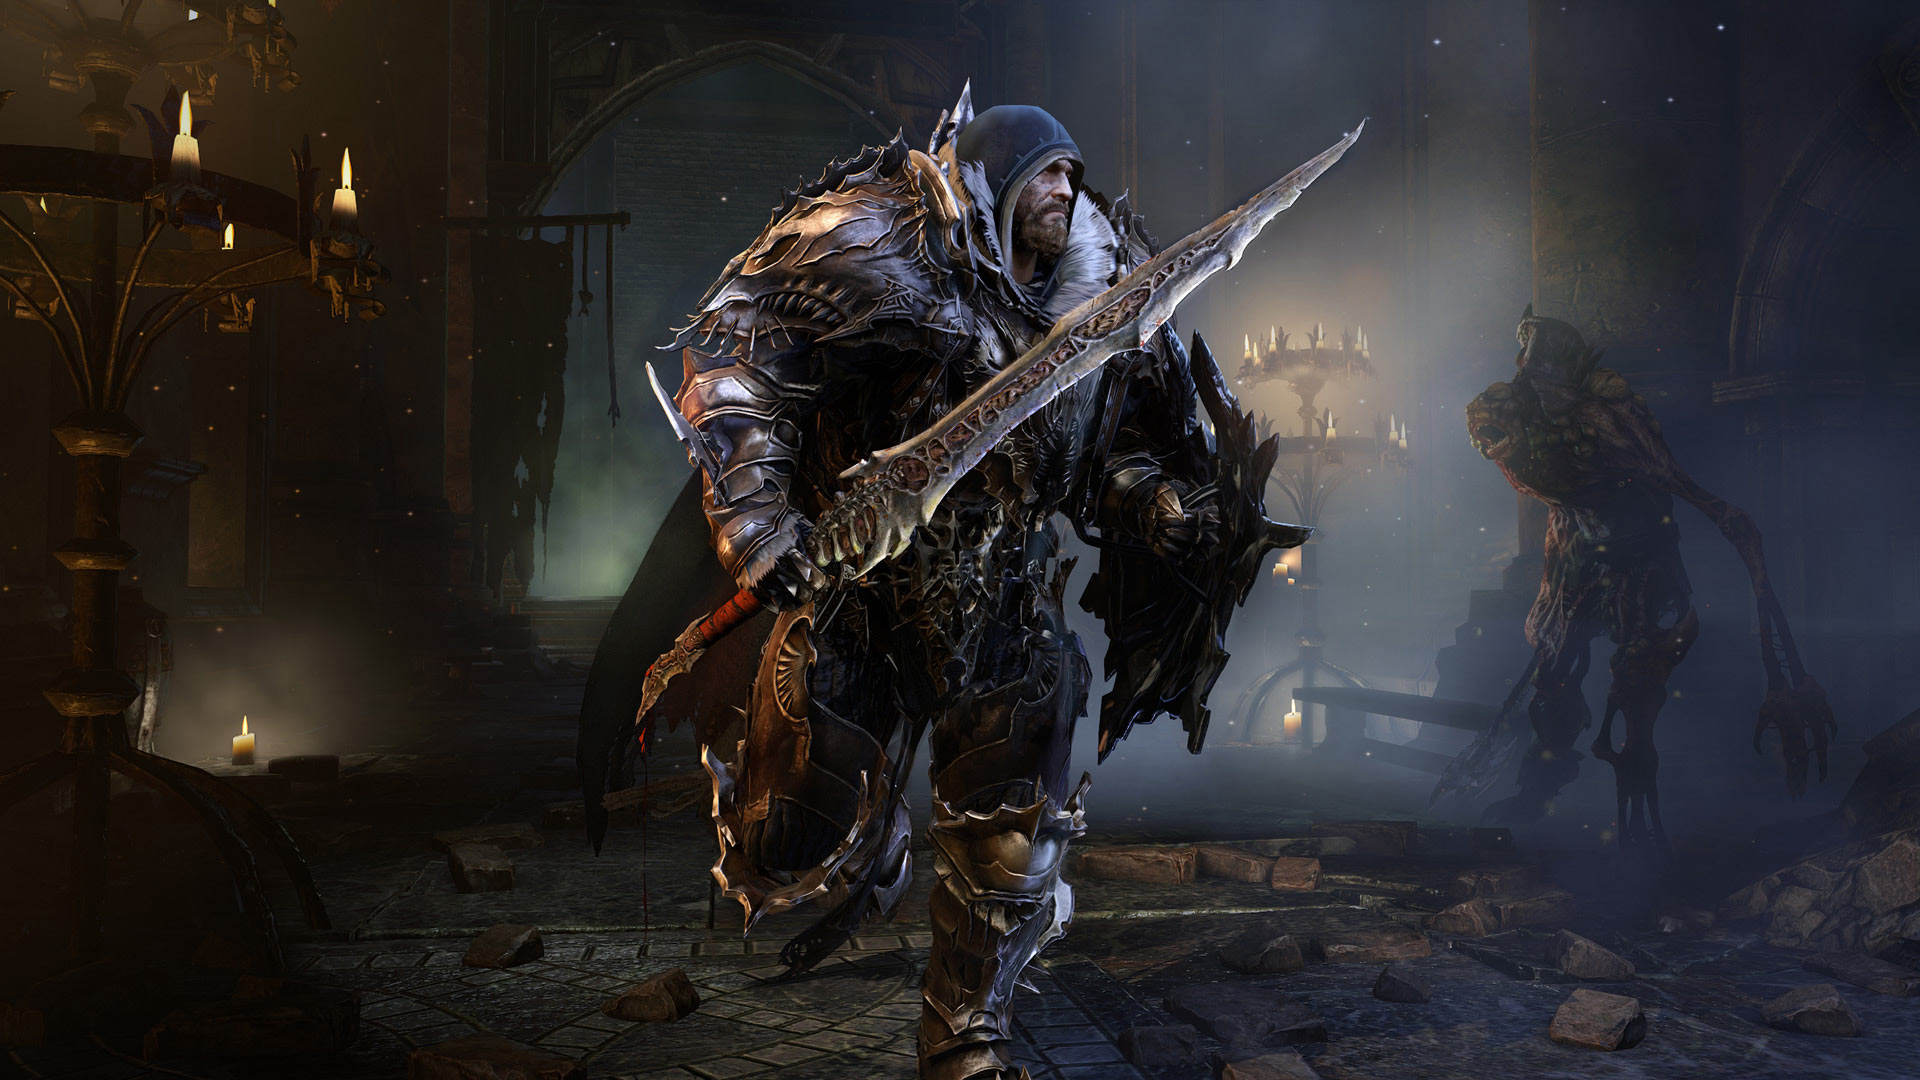 Executioner, Lords of the Fallen Wiki